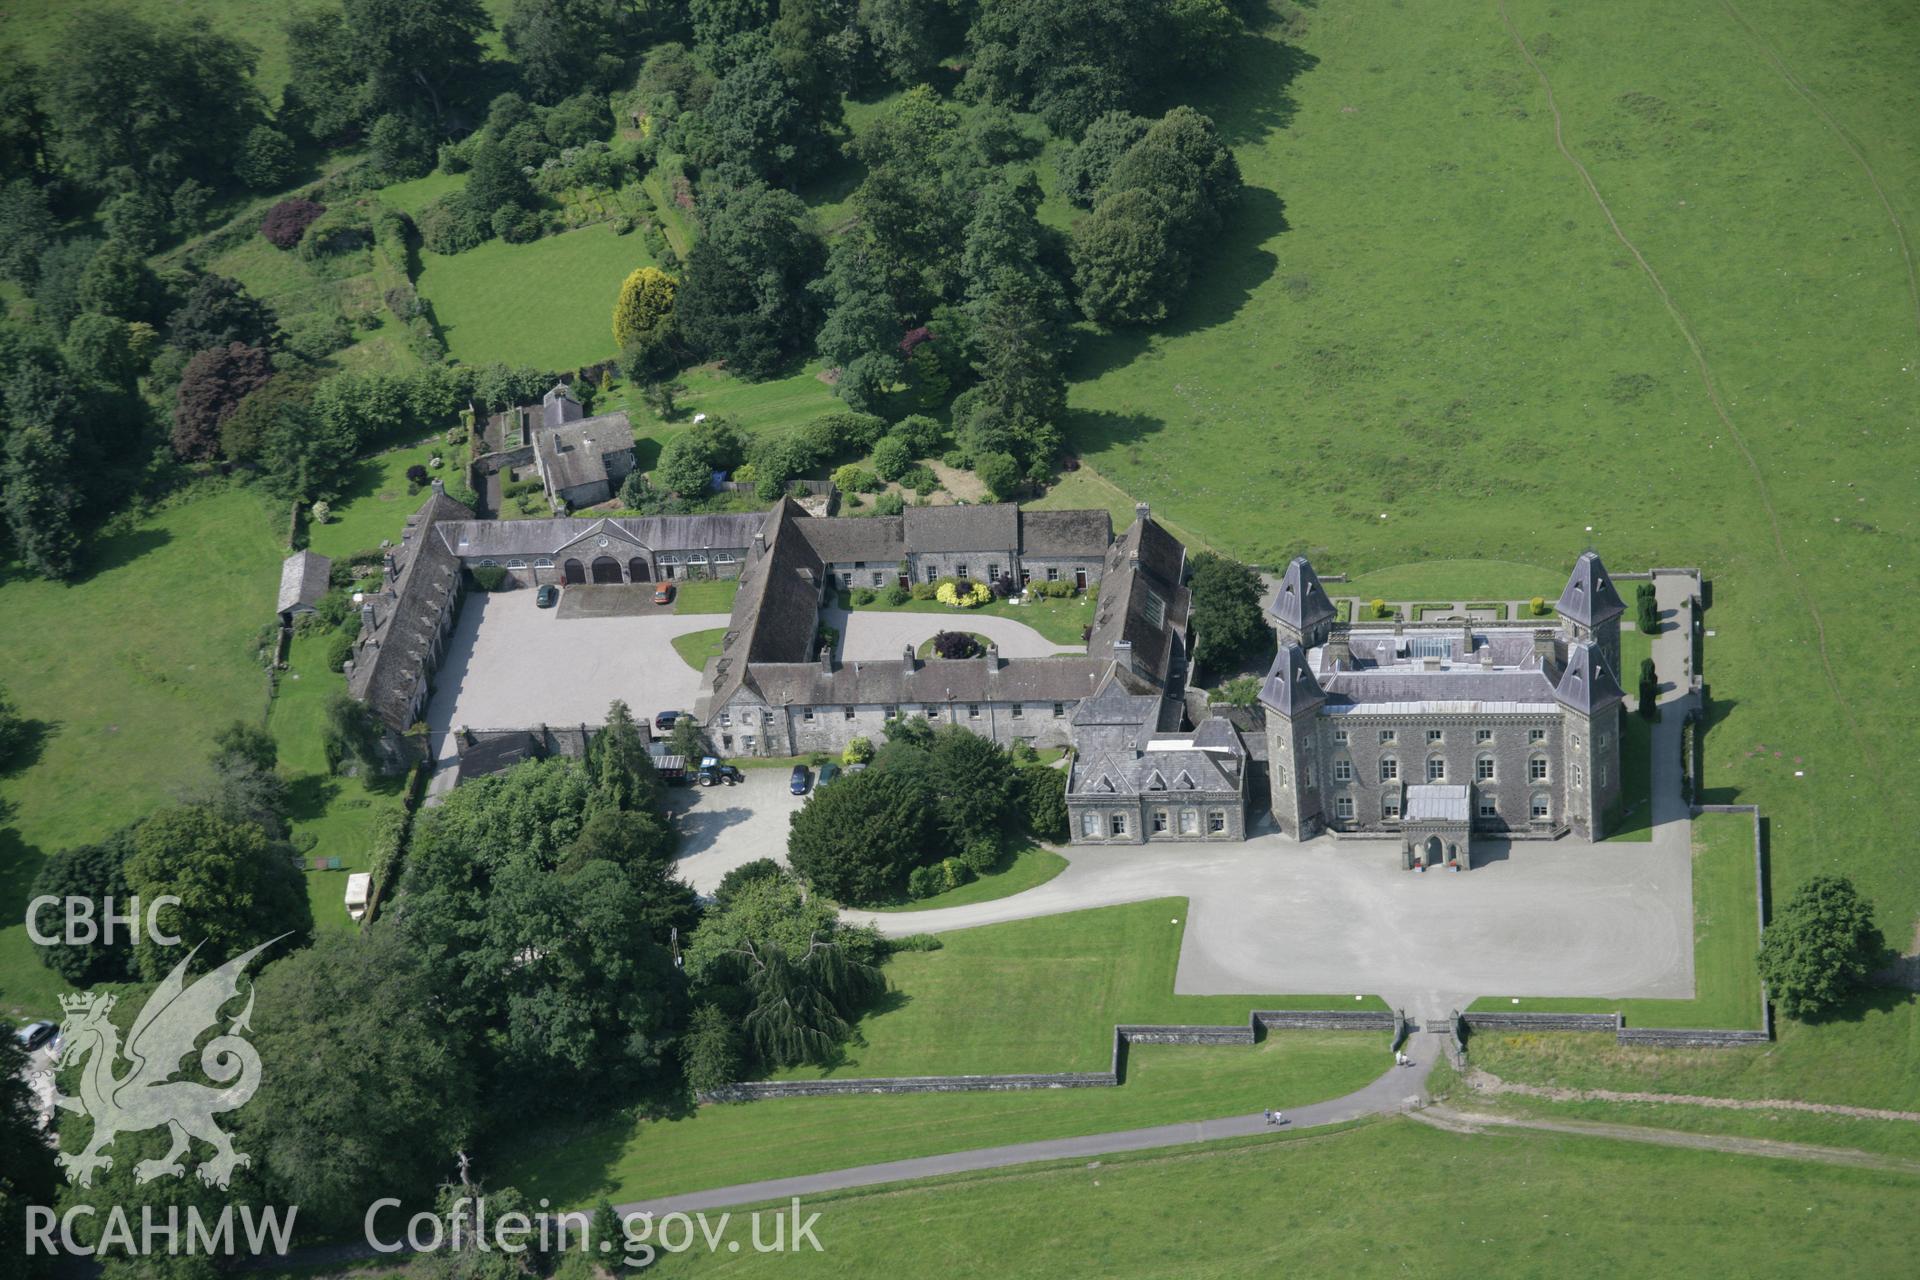 RCAHMW colour oblique aerial photograph of Newton House, (Dinefwr Castle), Llandeilo, showing clear overview of the house and buildings from the east. Taken on 11 July 2005 by Toby Driver